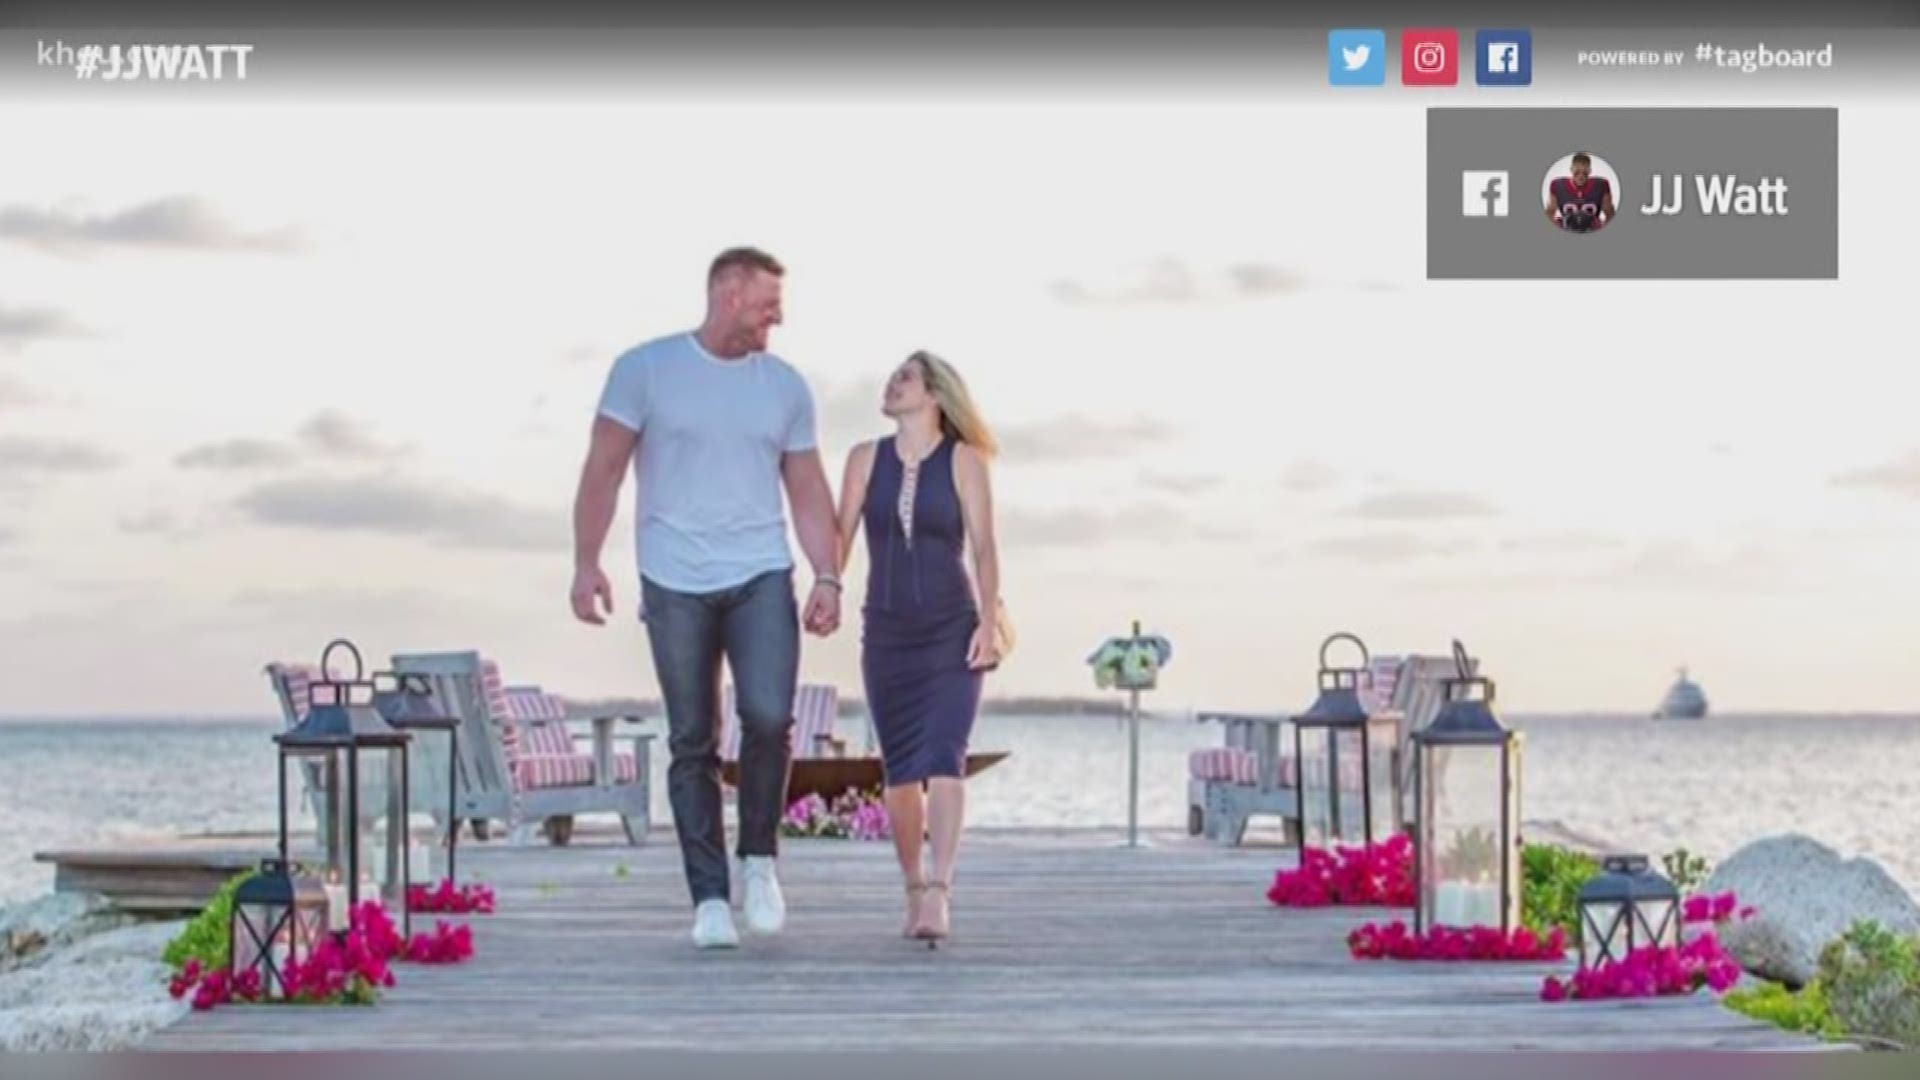 Houston Dash captain Kealia Ohai is calling her proposal to Texans star J.J. Watt "perfect." Watt proposed to Ohai over weekend while they were vacationing in the Bahamas.